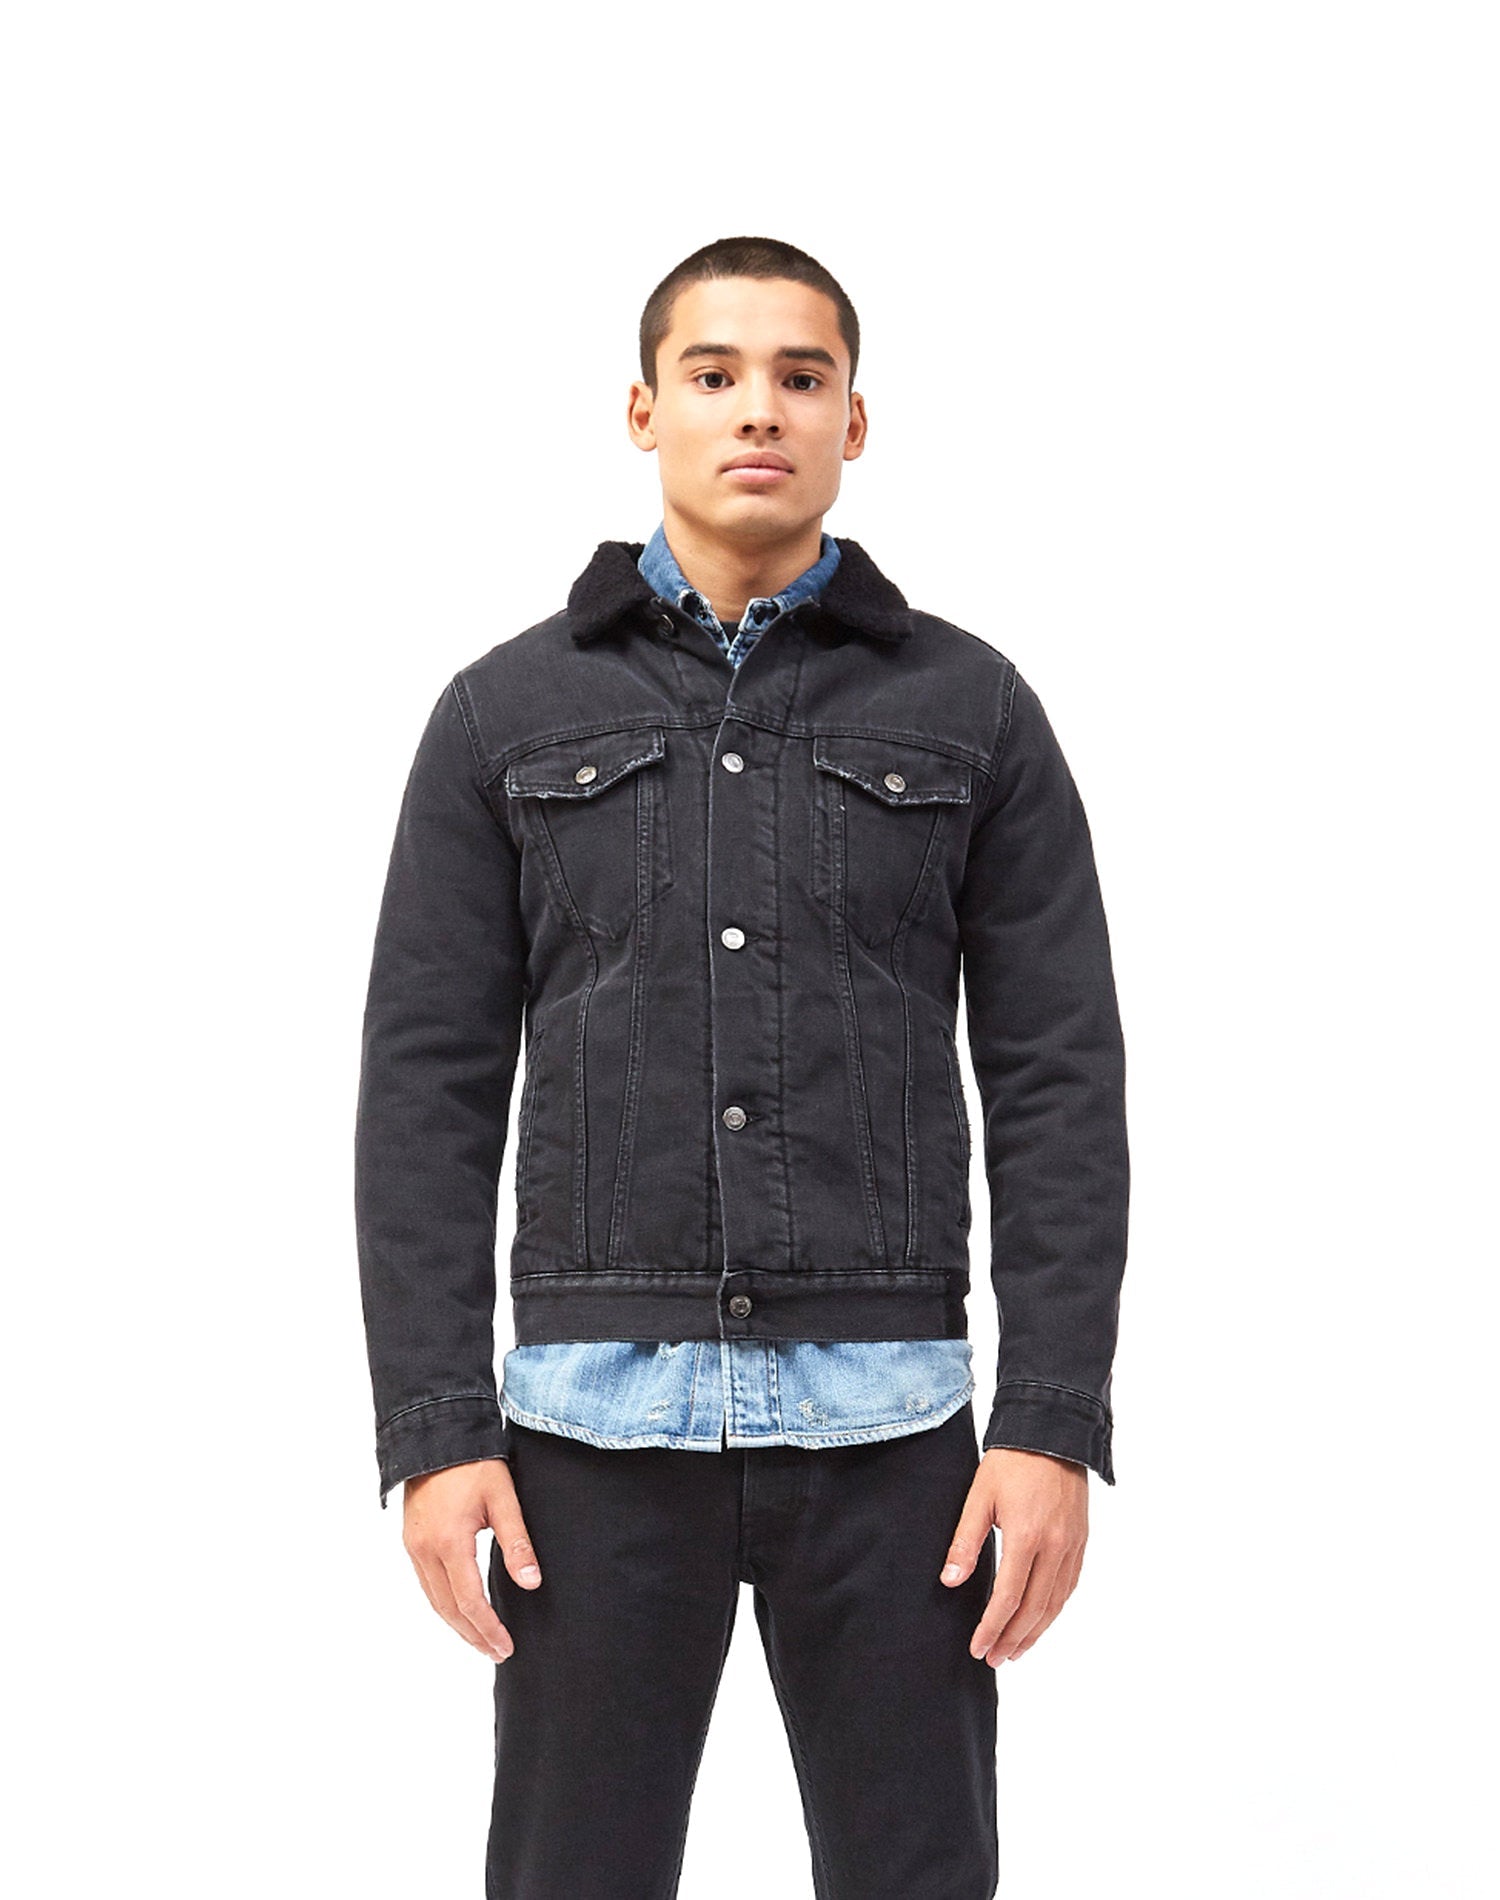 SHERPA MAN TRUCKER Demin jacket with buttons, lined collar. Wool inner lining, lined sleeves covered in polyester. Frontal pockets with flaps and button closure. Hidden pockets on the sides. 100% cotton. Lining: 100% polyester. Made in Italy. HTC LOS ANGE